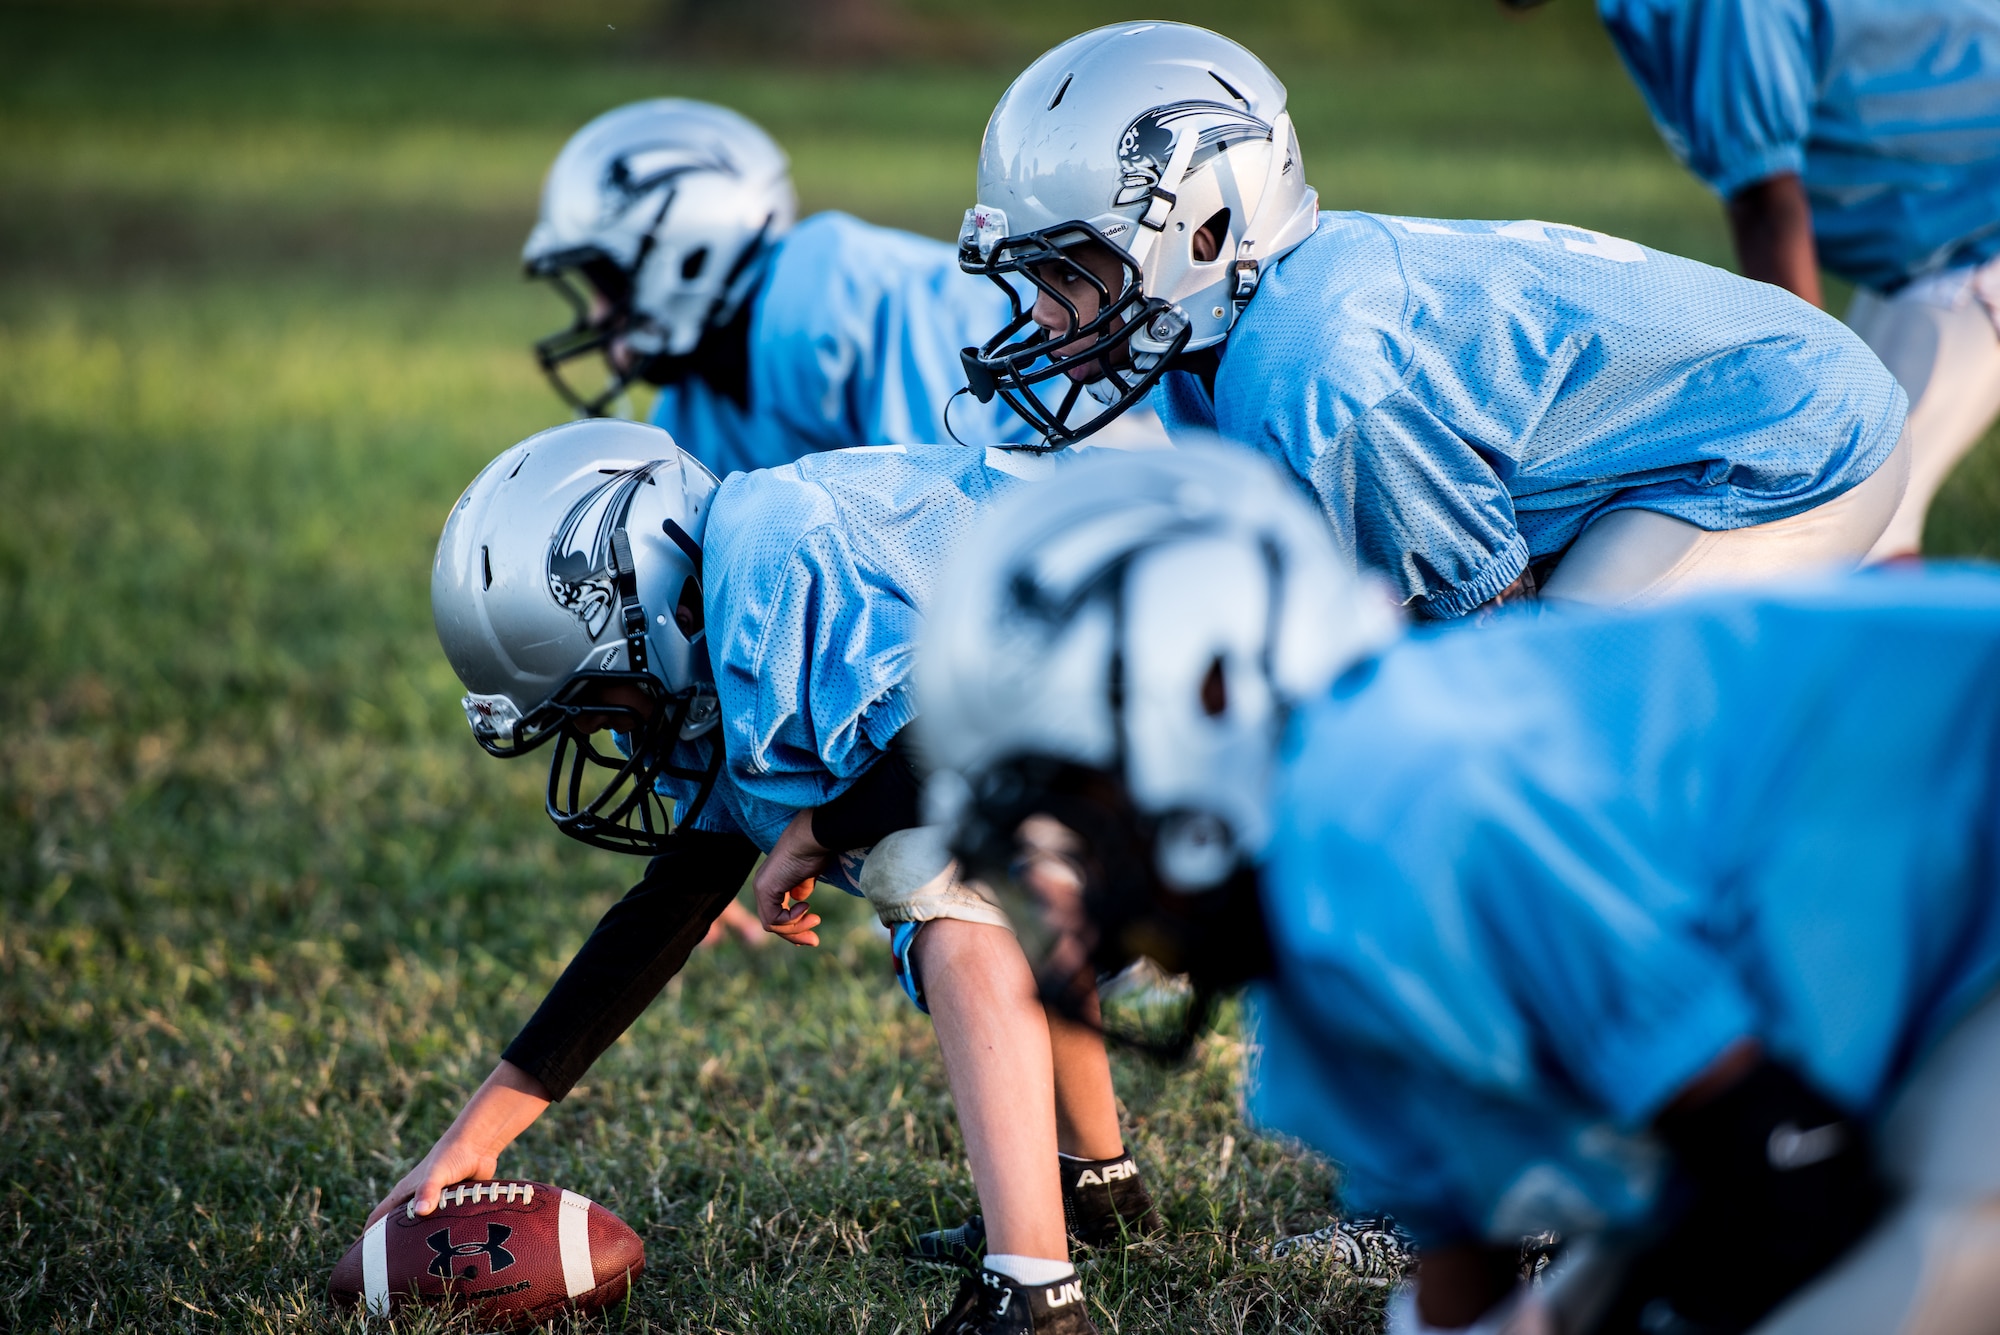 The Pop Warner Dover Caesar Rodney Raiders prepare to run a football play in Dover, Delaware, Oct. 18, 2018. The CR Raiders held practice every Thursday evening from 5:30 to 8 p.m. to prep Saturday games. (U.S. Air Force photo by Staff Sgt. Damien Taylor)